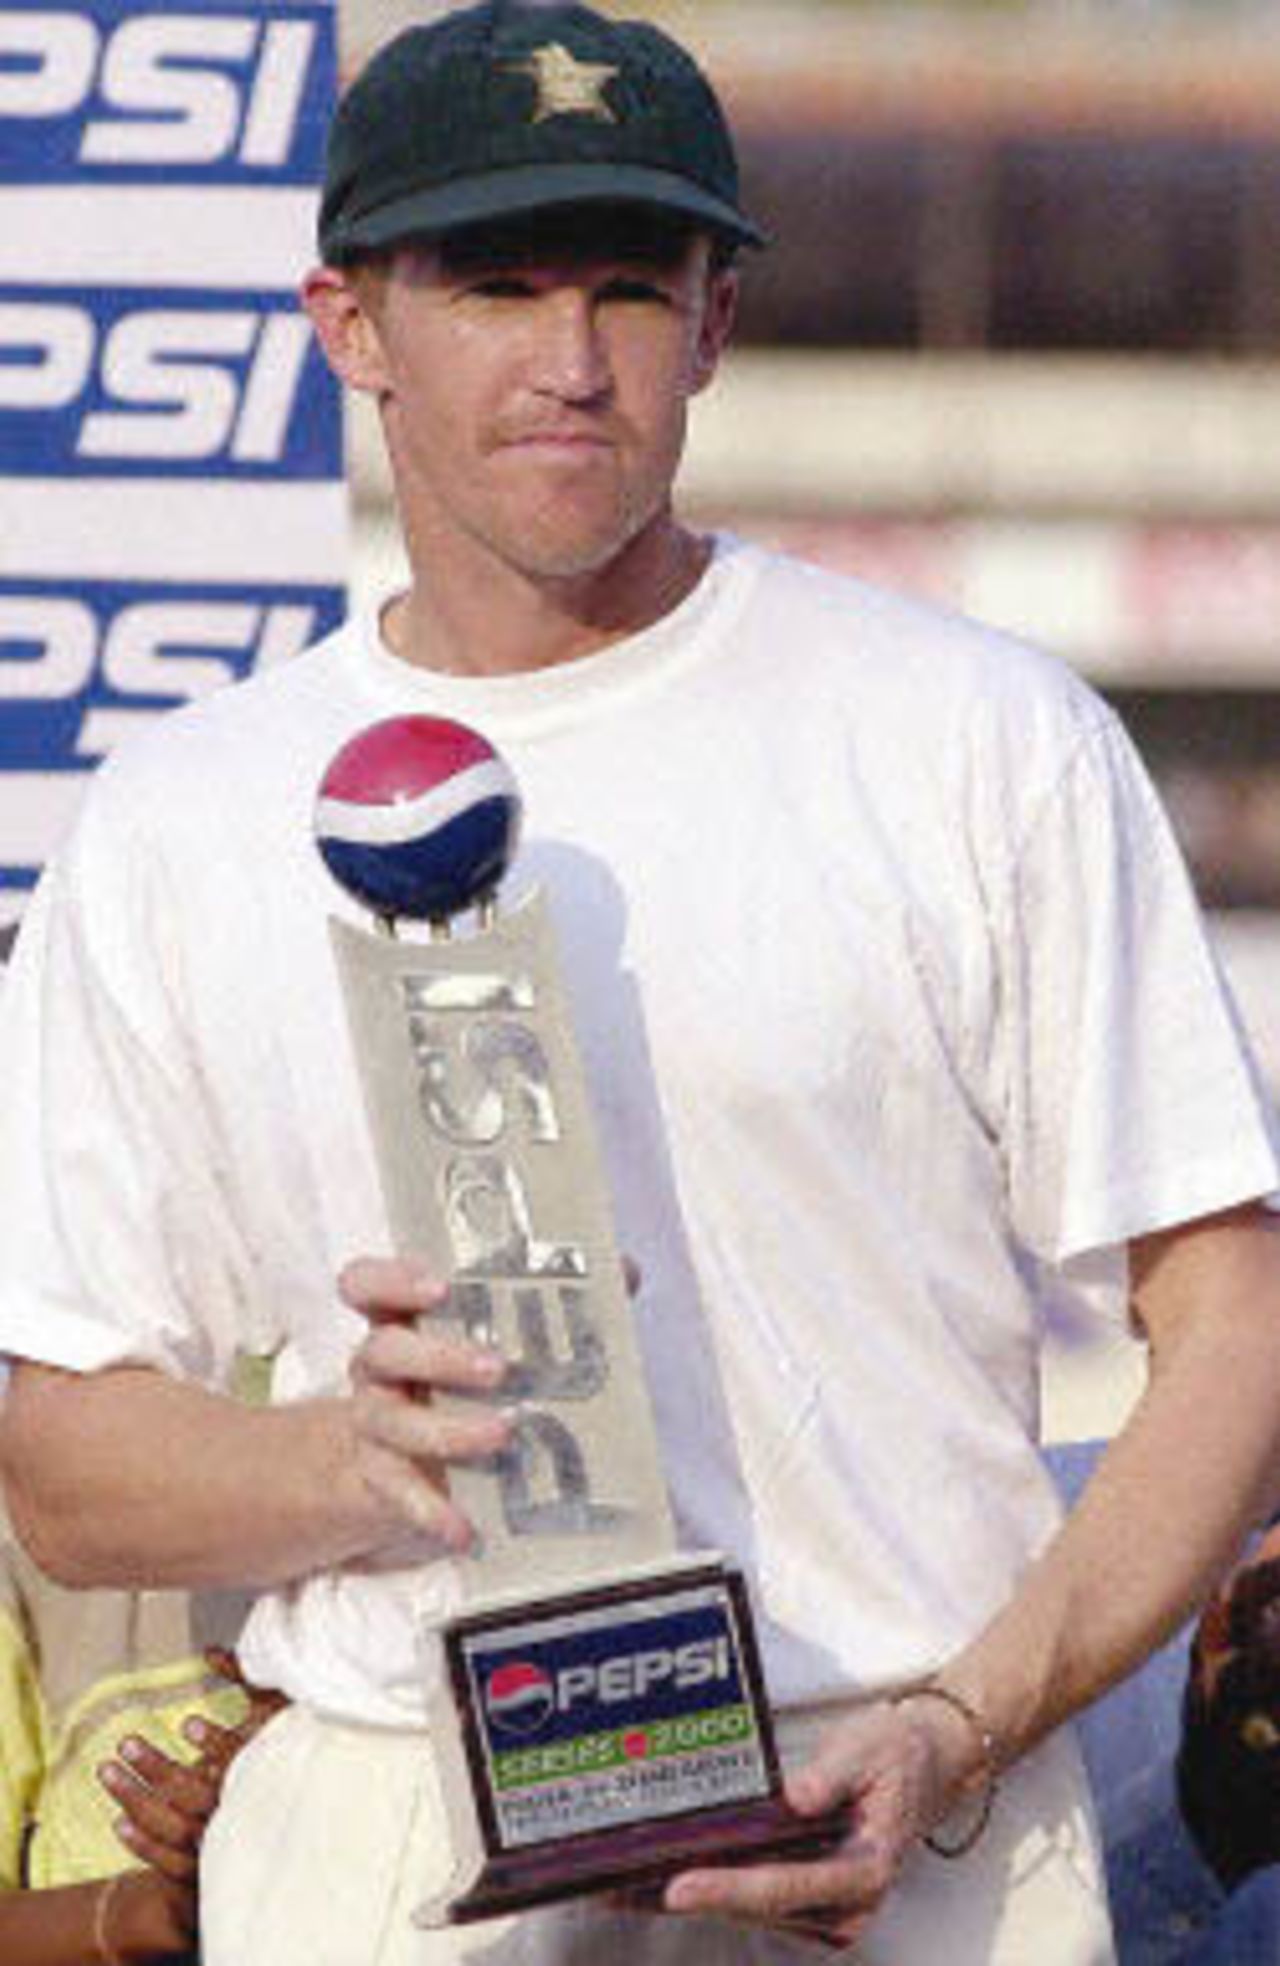 Andy Flower poses with the Man of the Match trophy, Zimbabwe in India, 2000/01, 2nd Test, India v Zimbabwe, Vidarbha C.A. Ground, Nagpur, 25-29 November 2000 (Day 5).